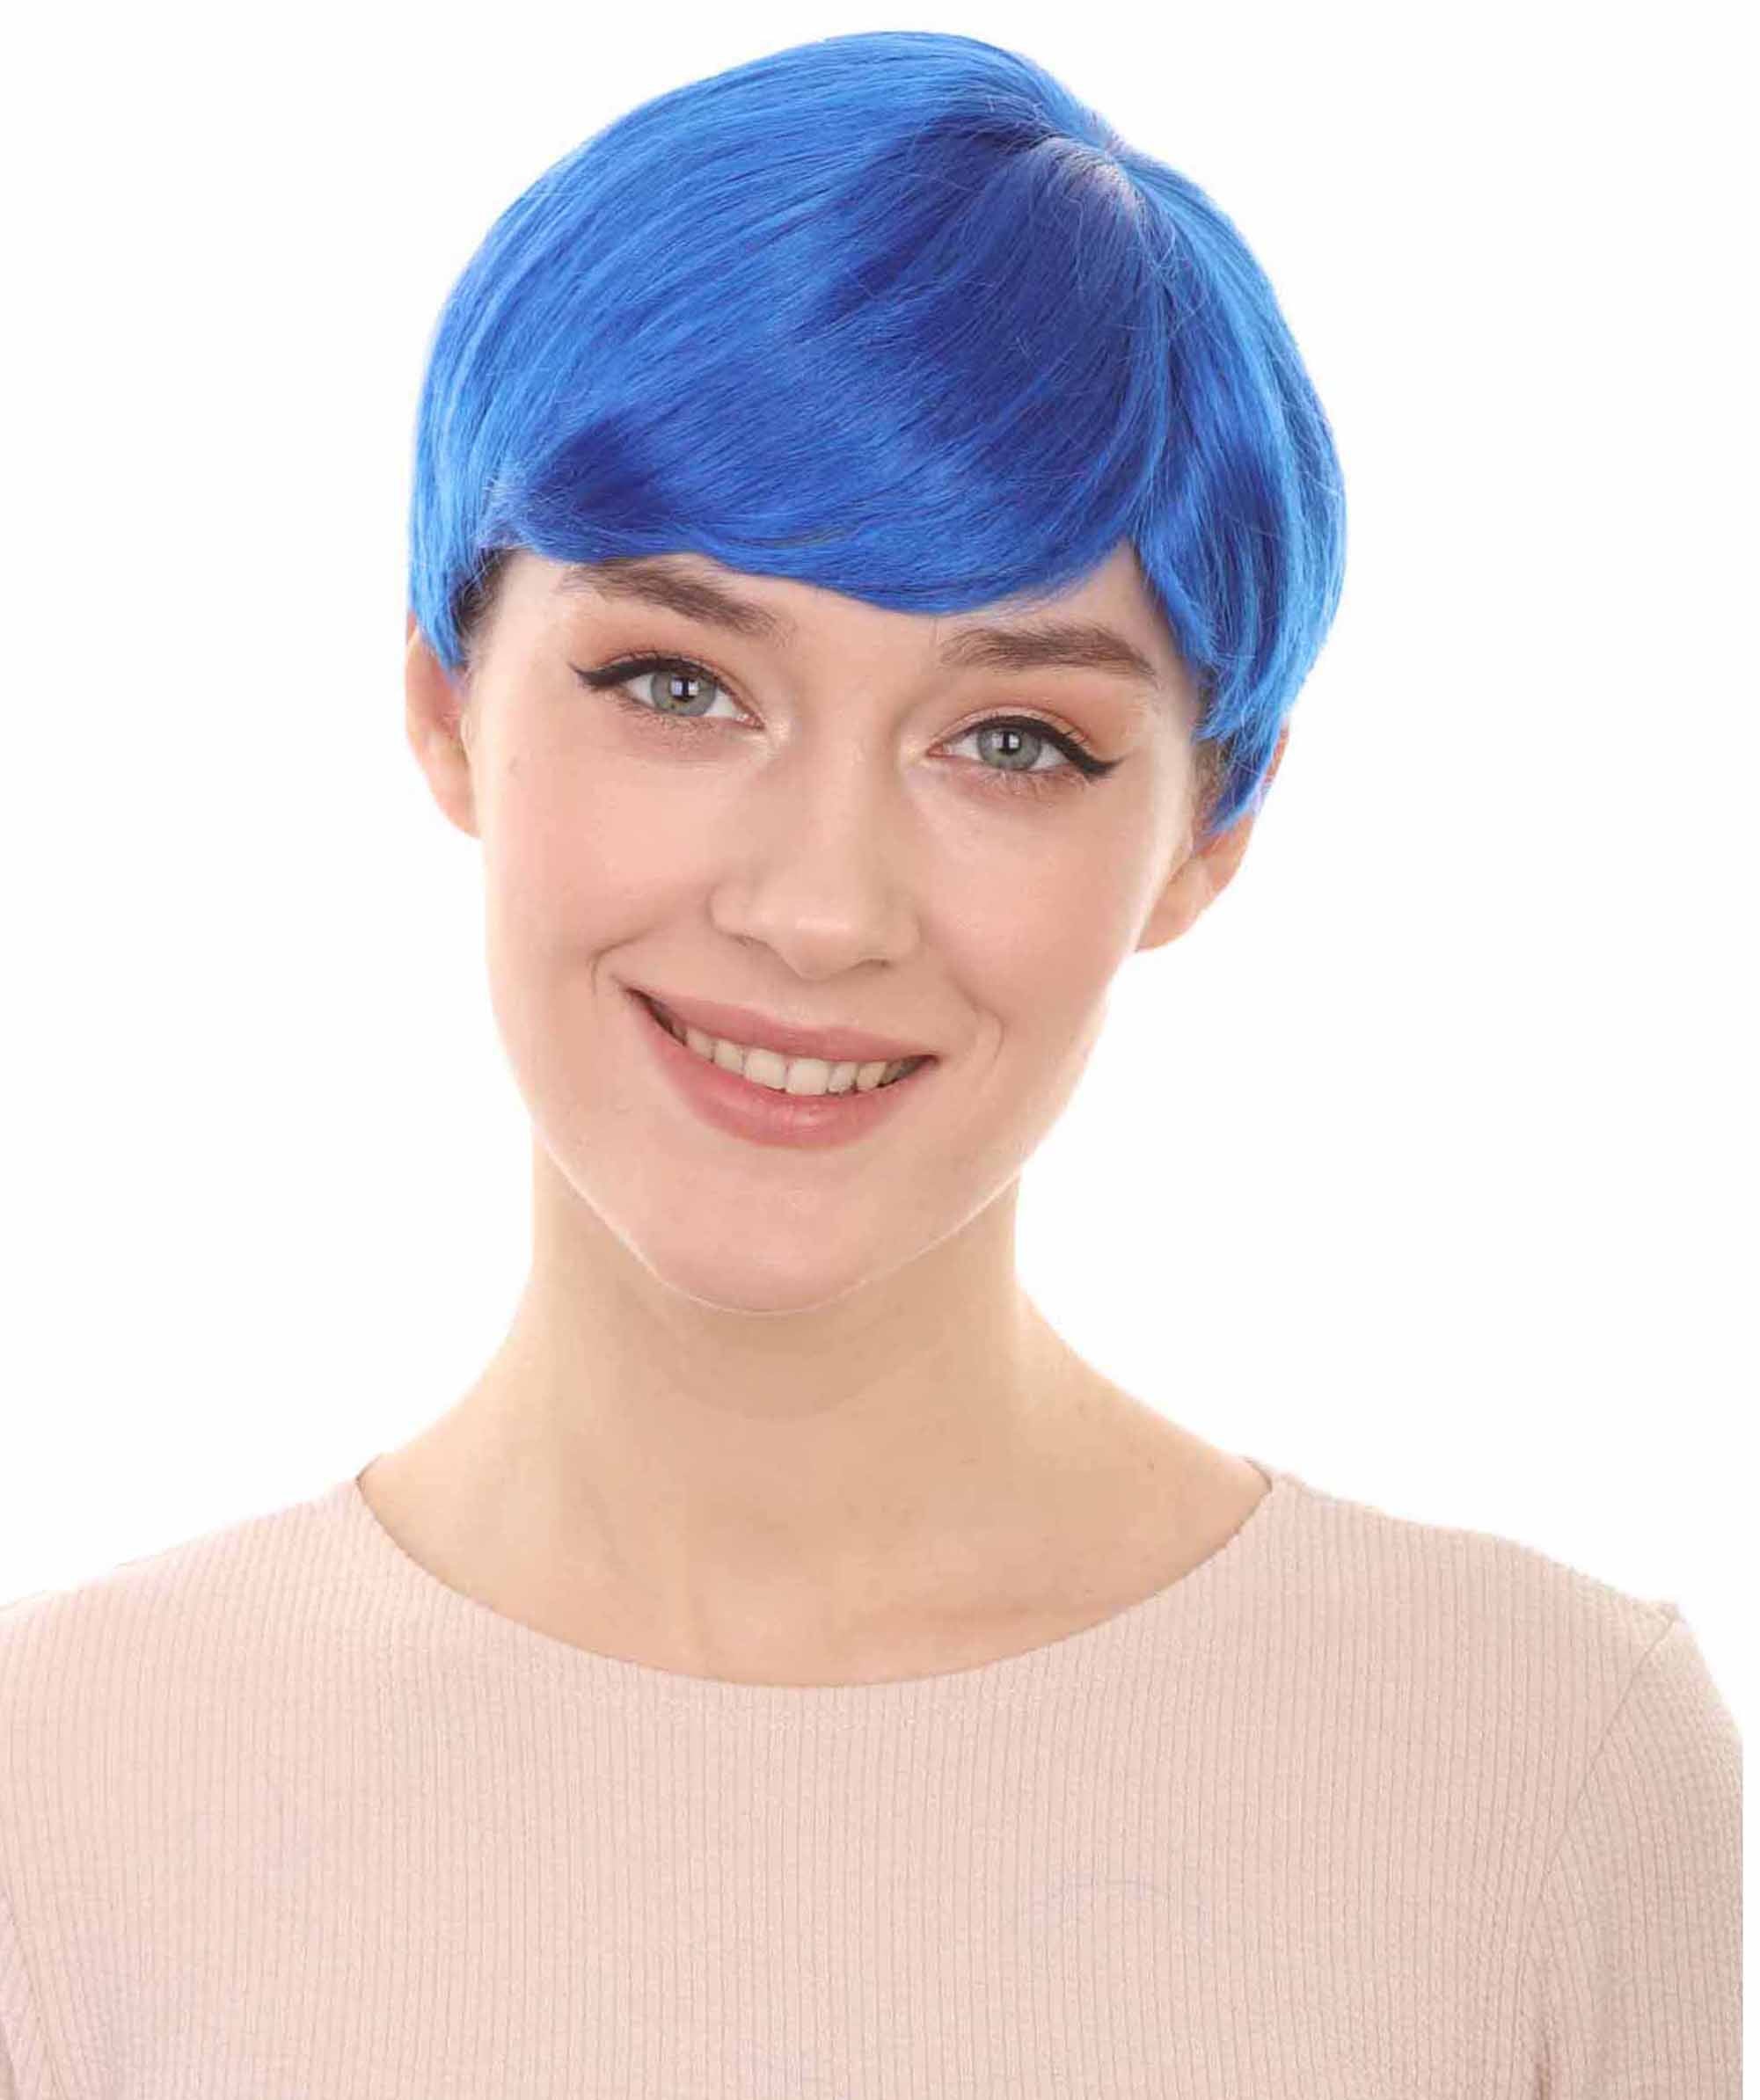 Womens Neon Blue Wig | Sexy Cosplay Party Wig | Premium Breathable Capless Cap